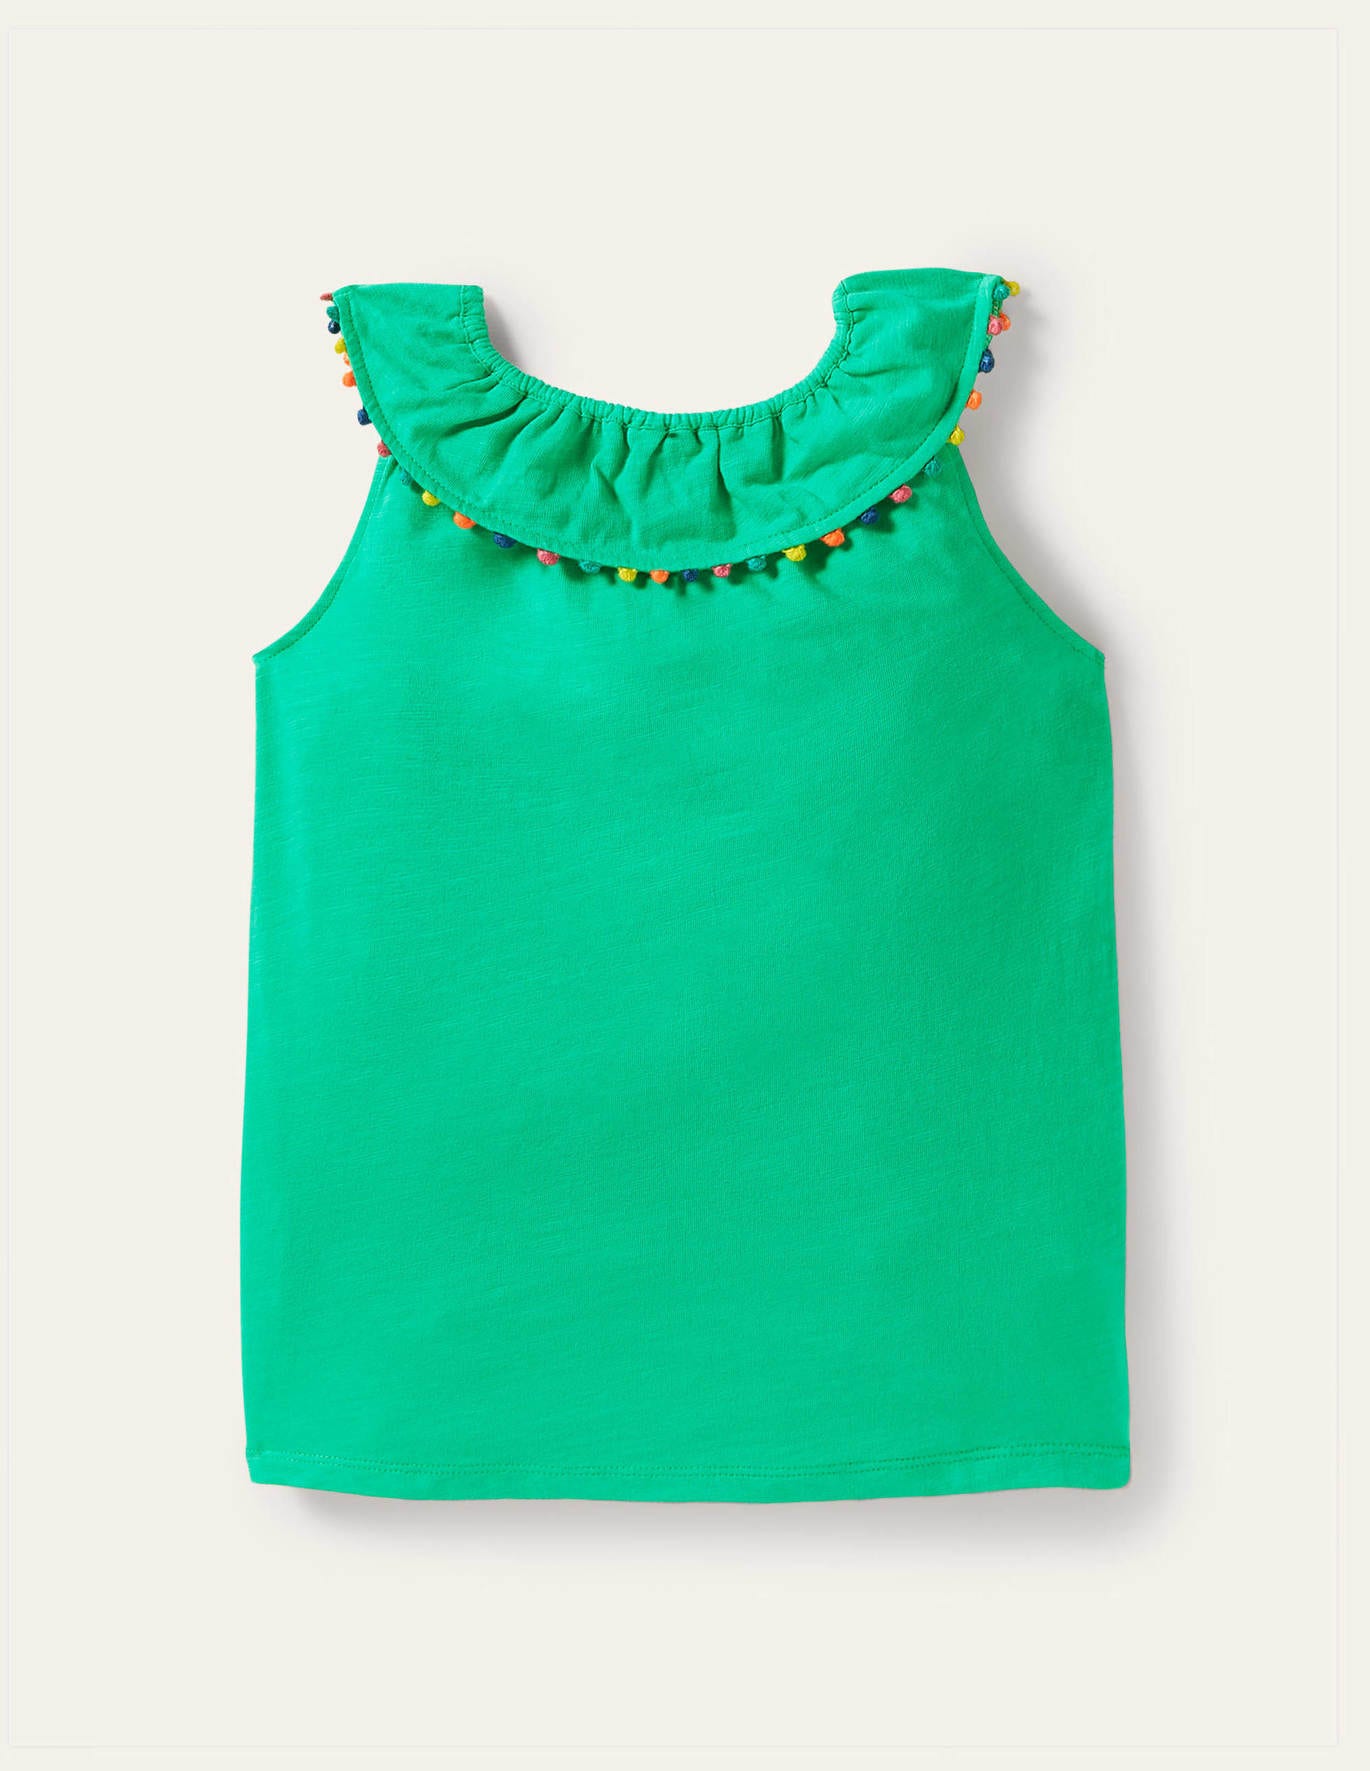 Boden Charlie Pom Jersey Tank Top - Tropical Green